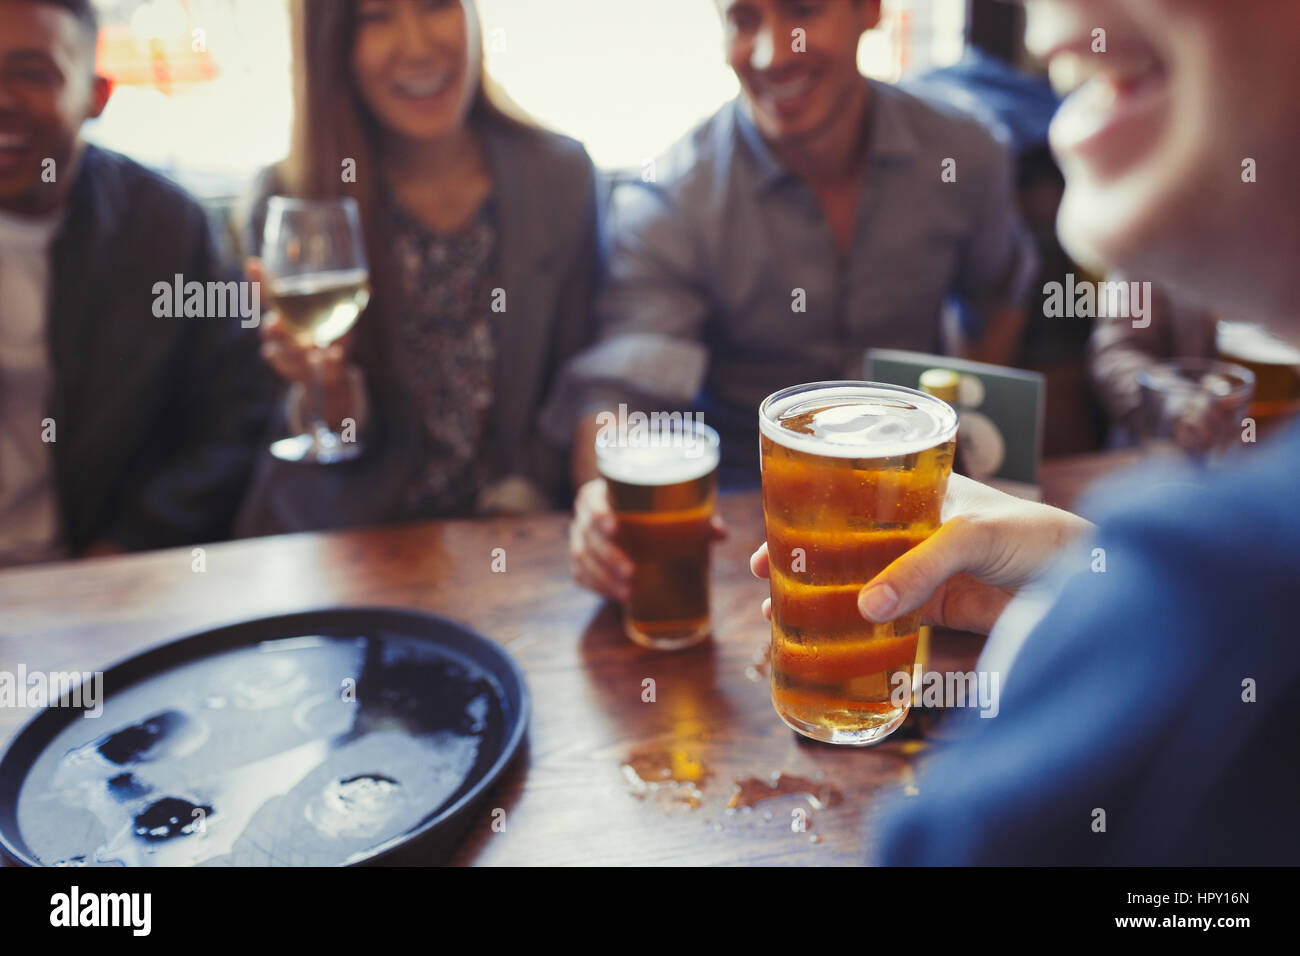 Friends drinking beer and wine at table in bar Stock Photo